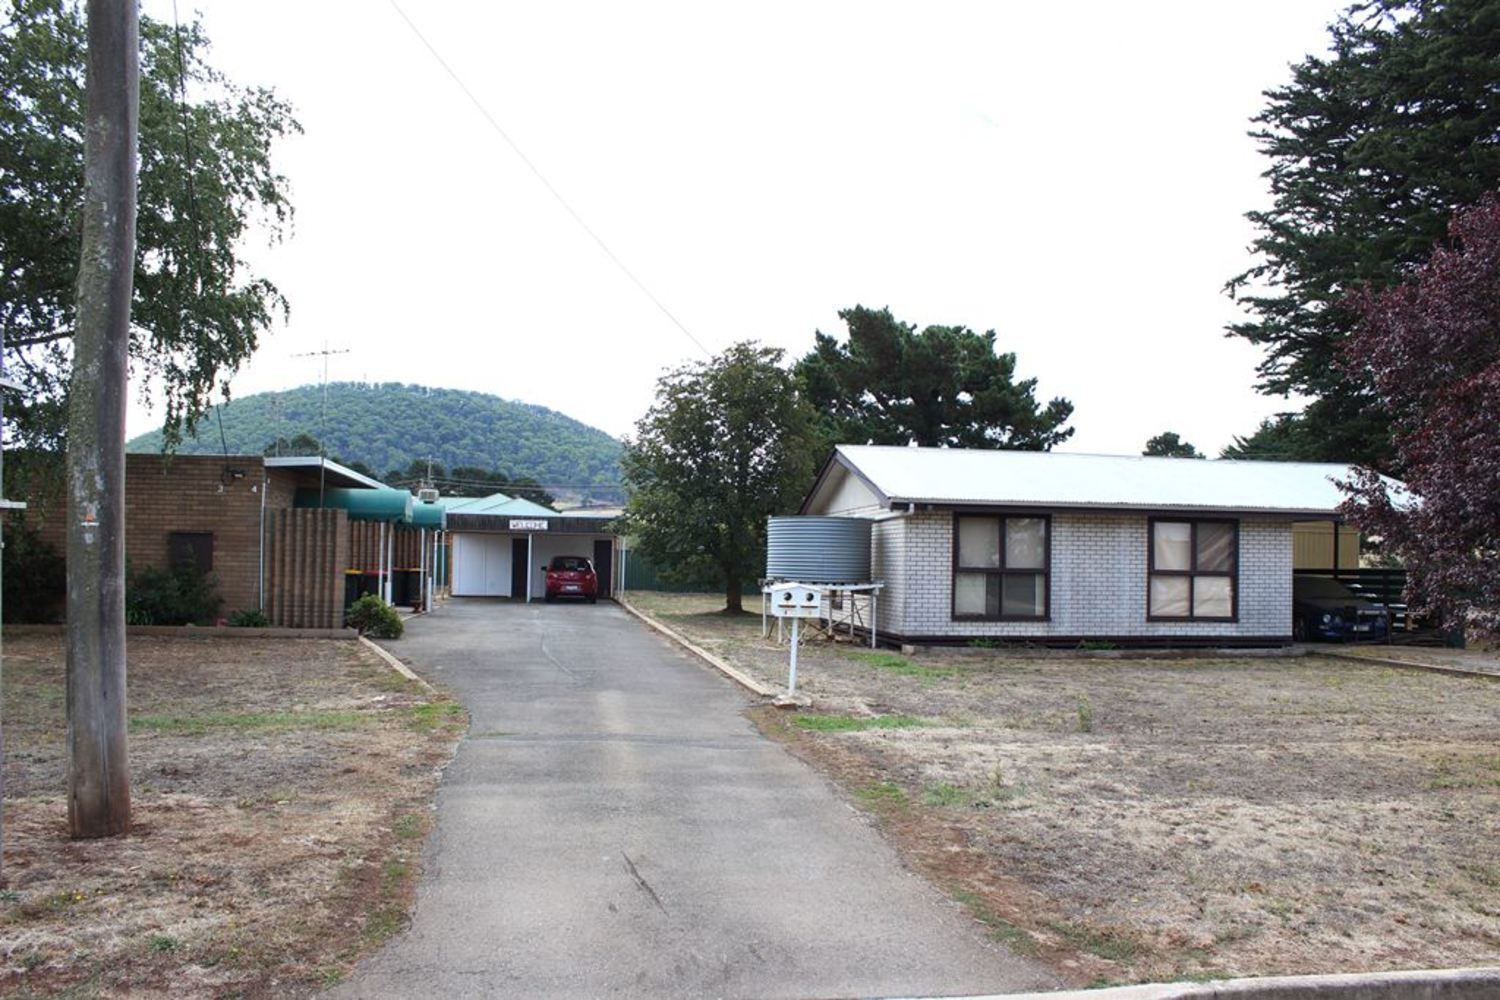 6 - 10 Ti Tree Road, Dunnstown VIC 3352, Image 2